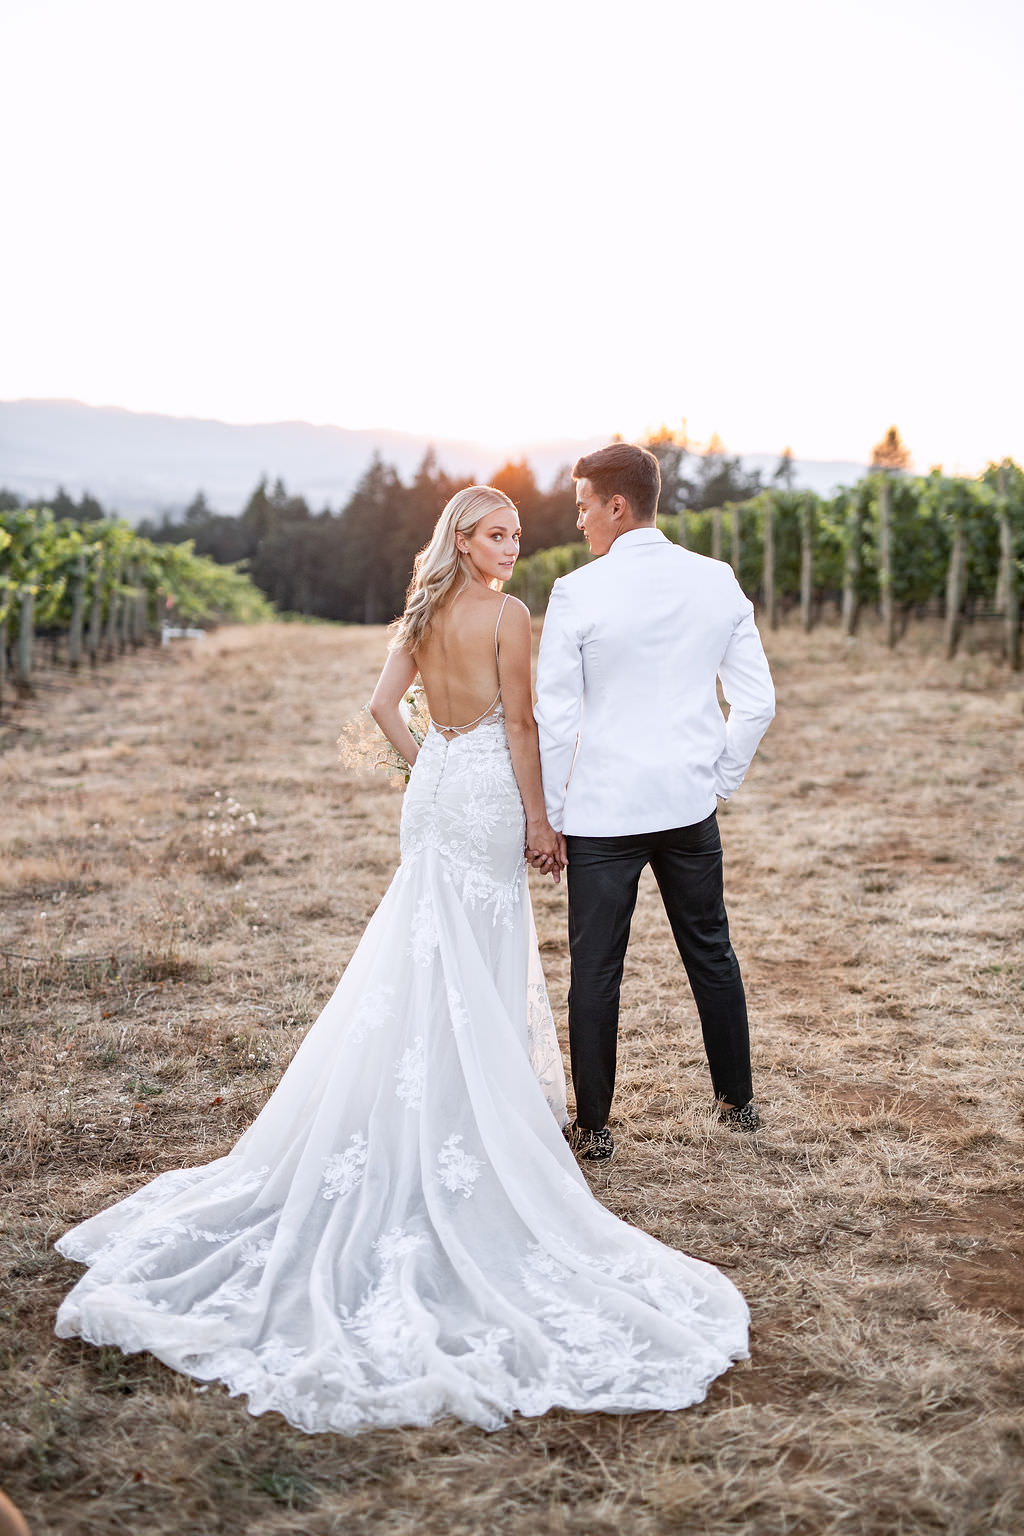 newlywed golden hour portrait at oregon winery in summer